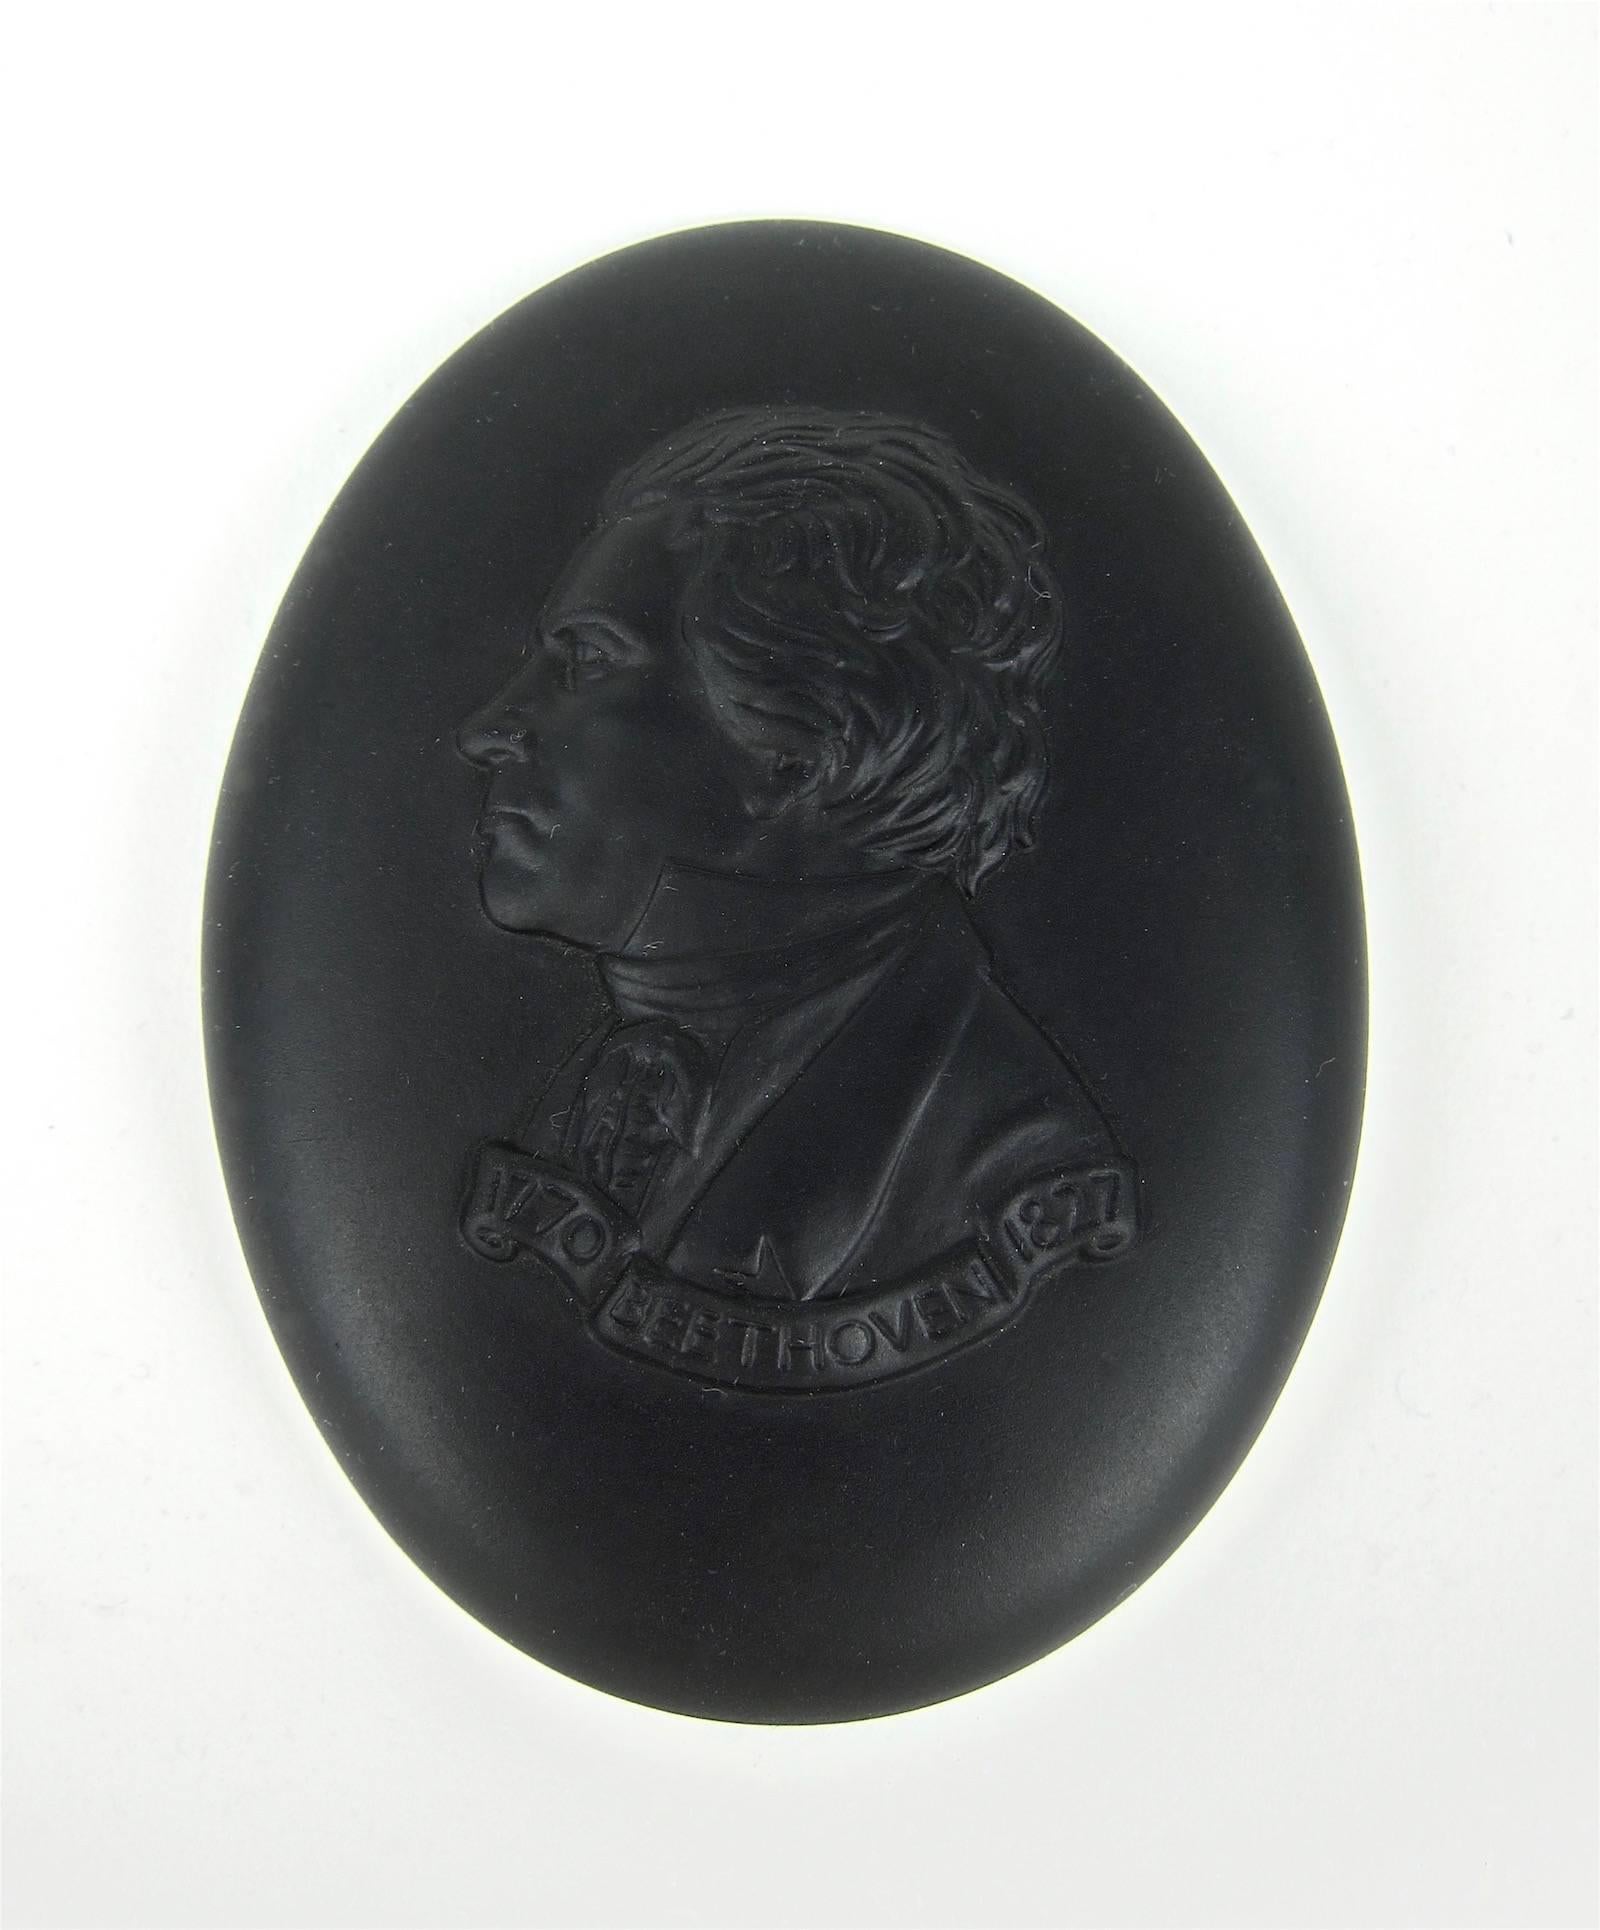 A Wedgwood portrait medallion of German composer and pianist, Ludwig van Beethoven, made in England in 1970. The oval plaque is crafted in Wedgwood's black basalt (stoneware), a material developed by Josiah Wedgwood in 1768. 

The medallion